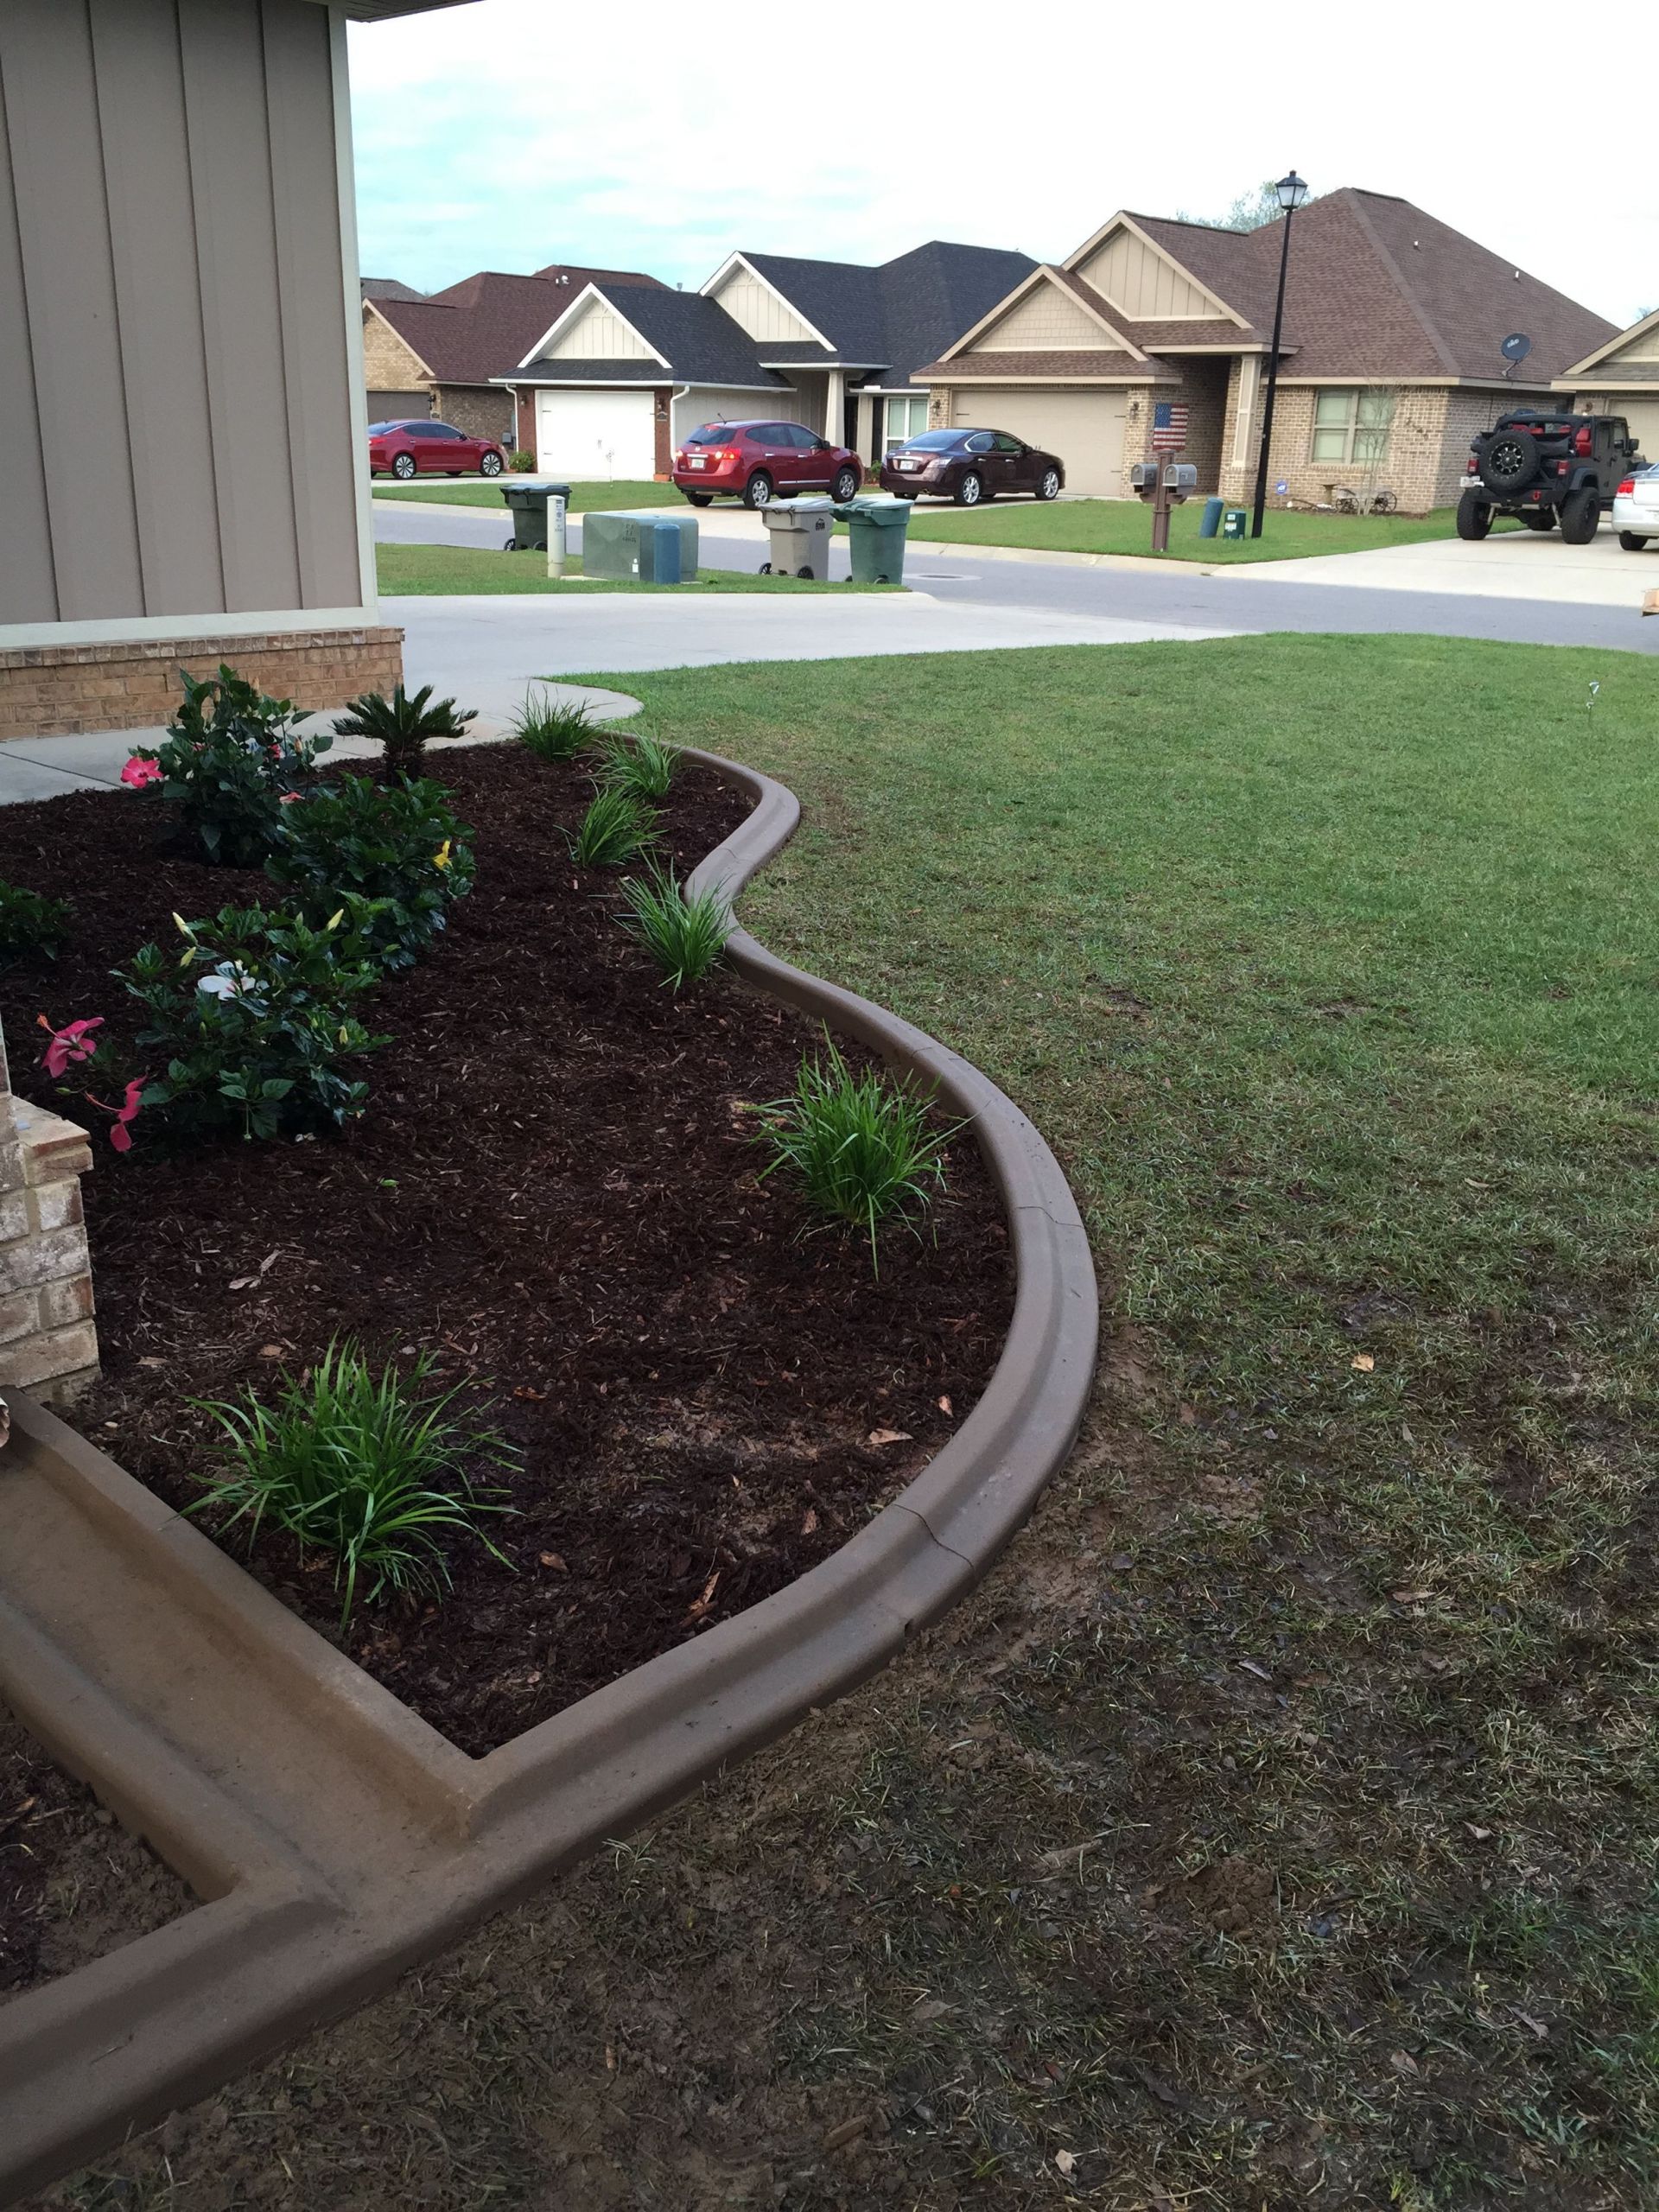 Concrete Landscape Edging Blocks
 Mowers Edge with a splash block added in Awesome